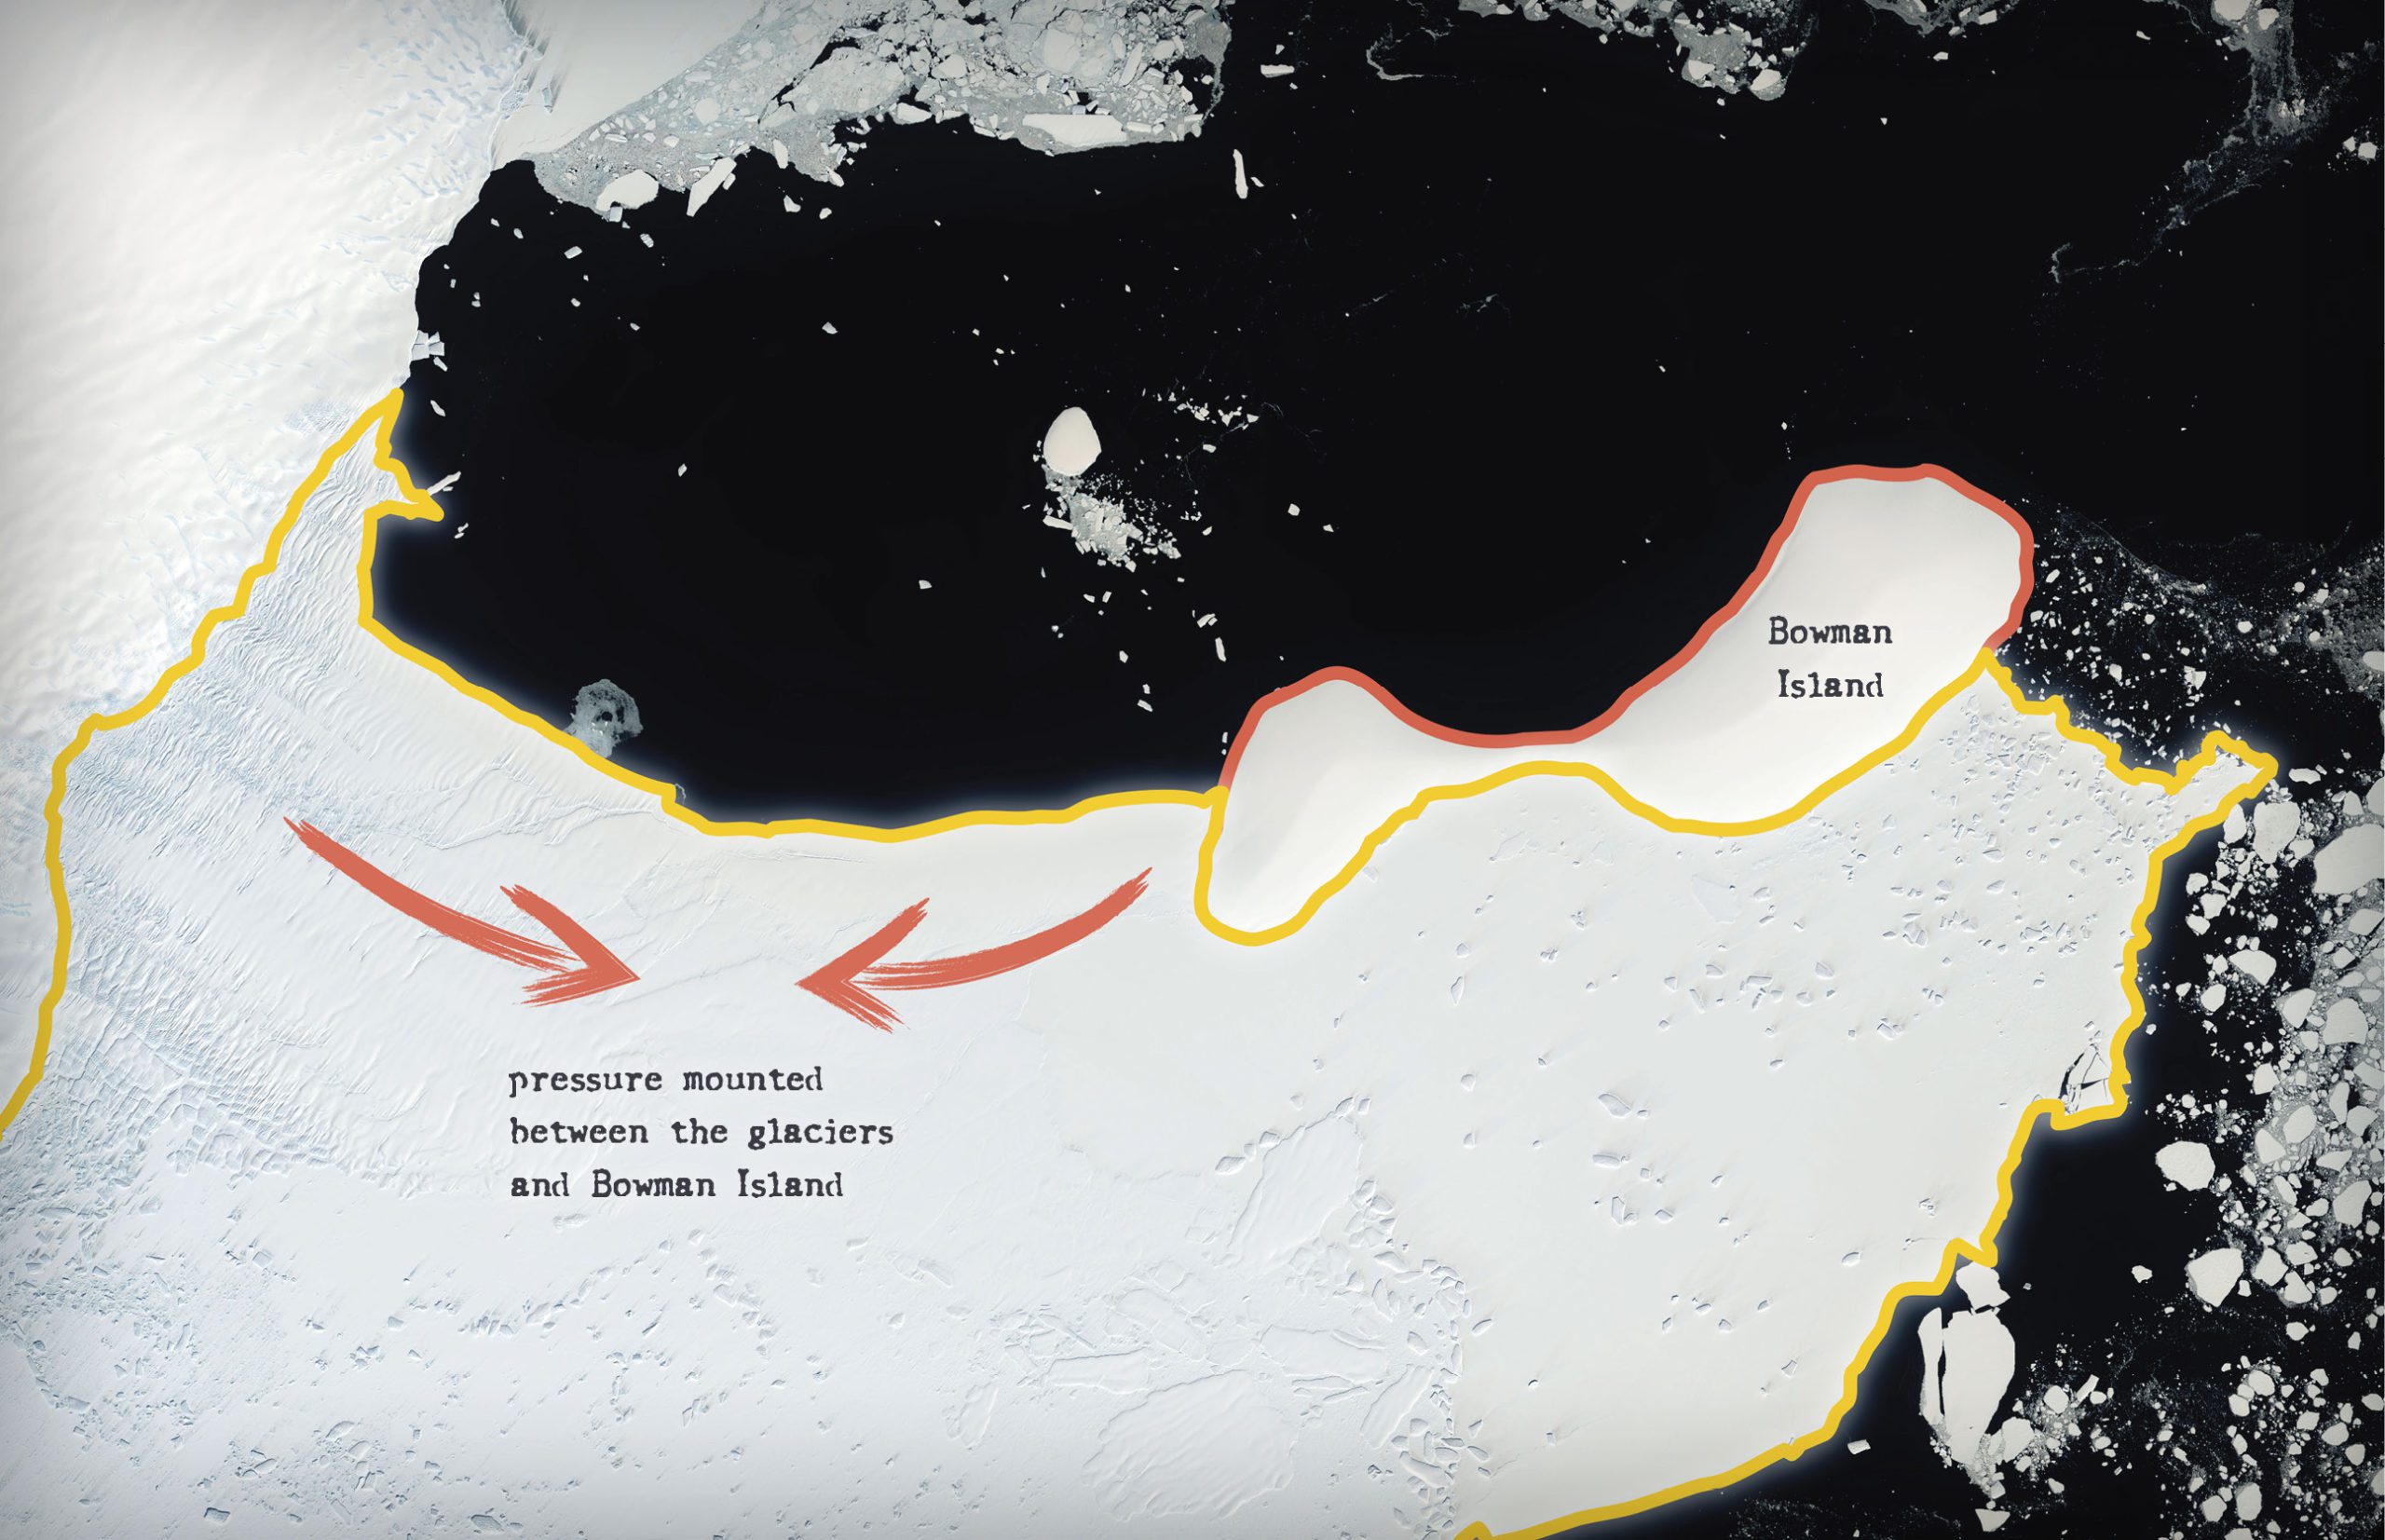 Conger Ice Shelf before the collapse